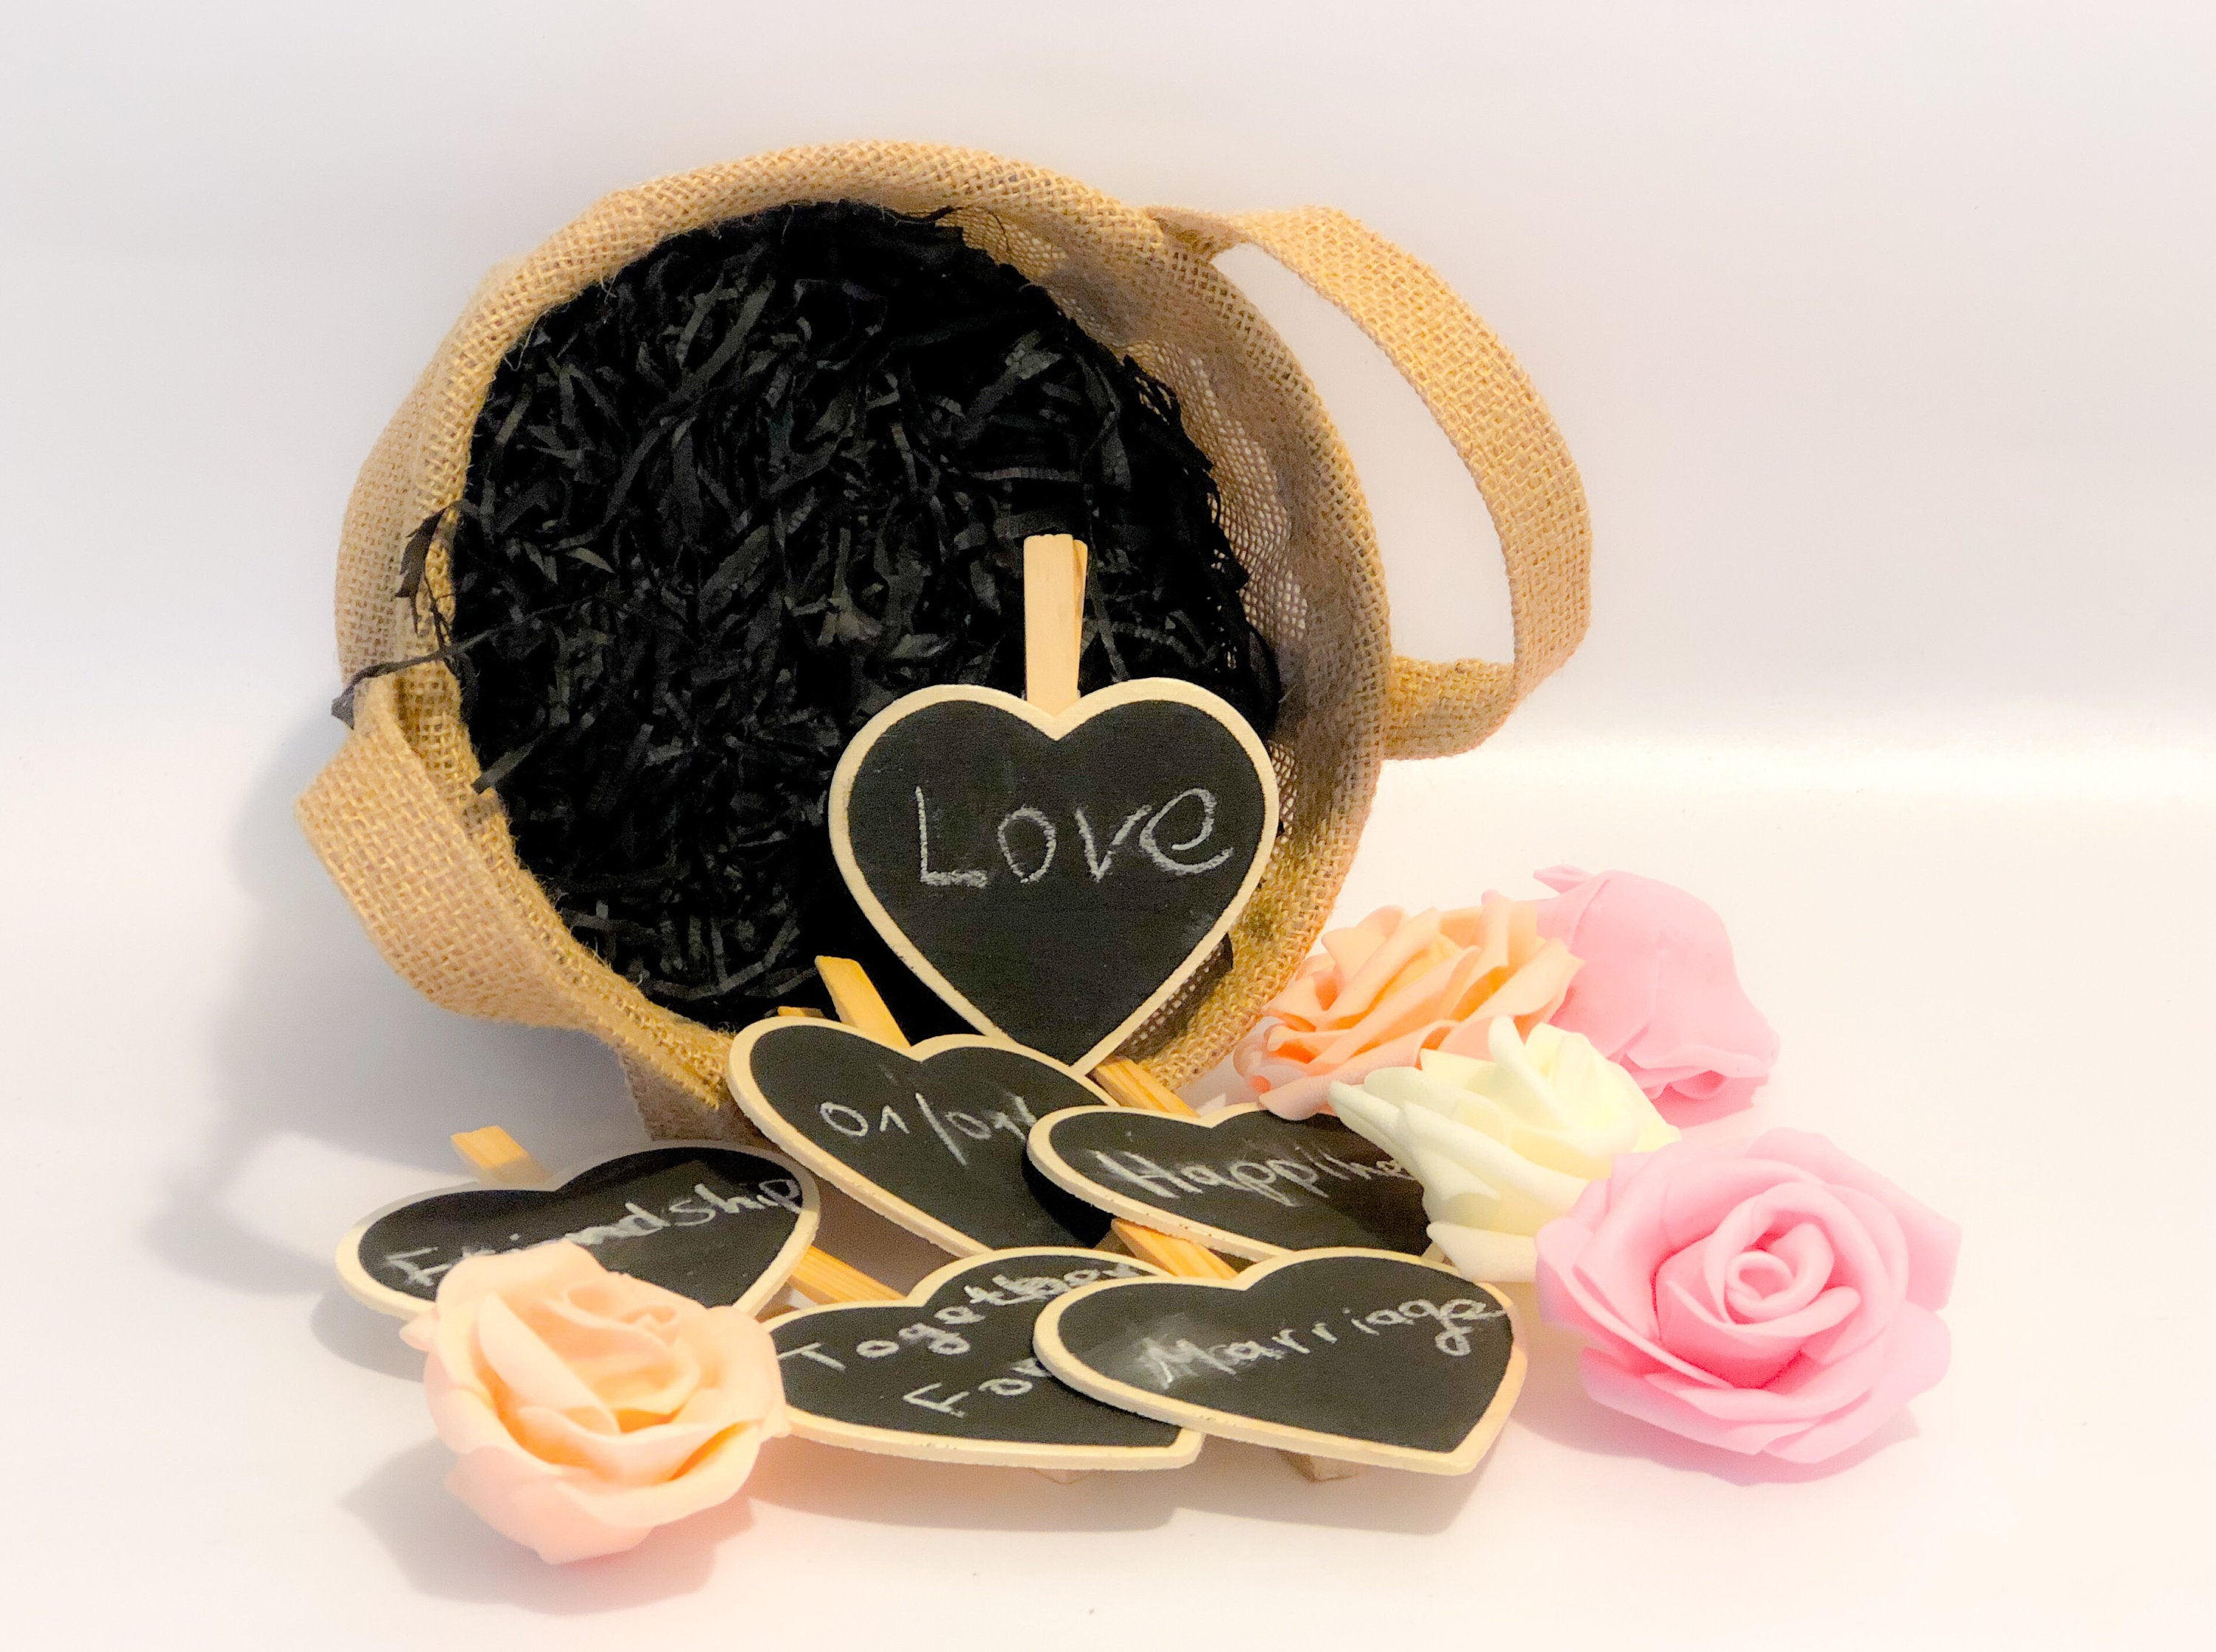 Set of Wooden Heart Shaped Chalkboard Clothespin